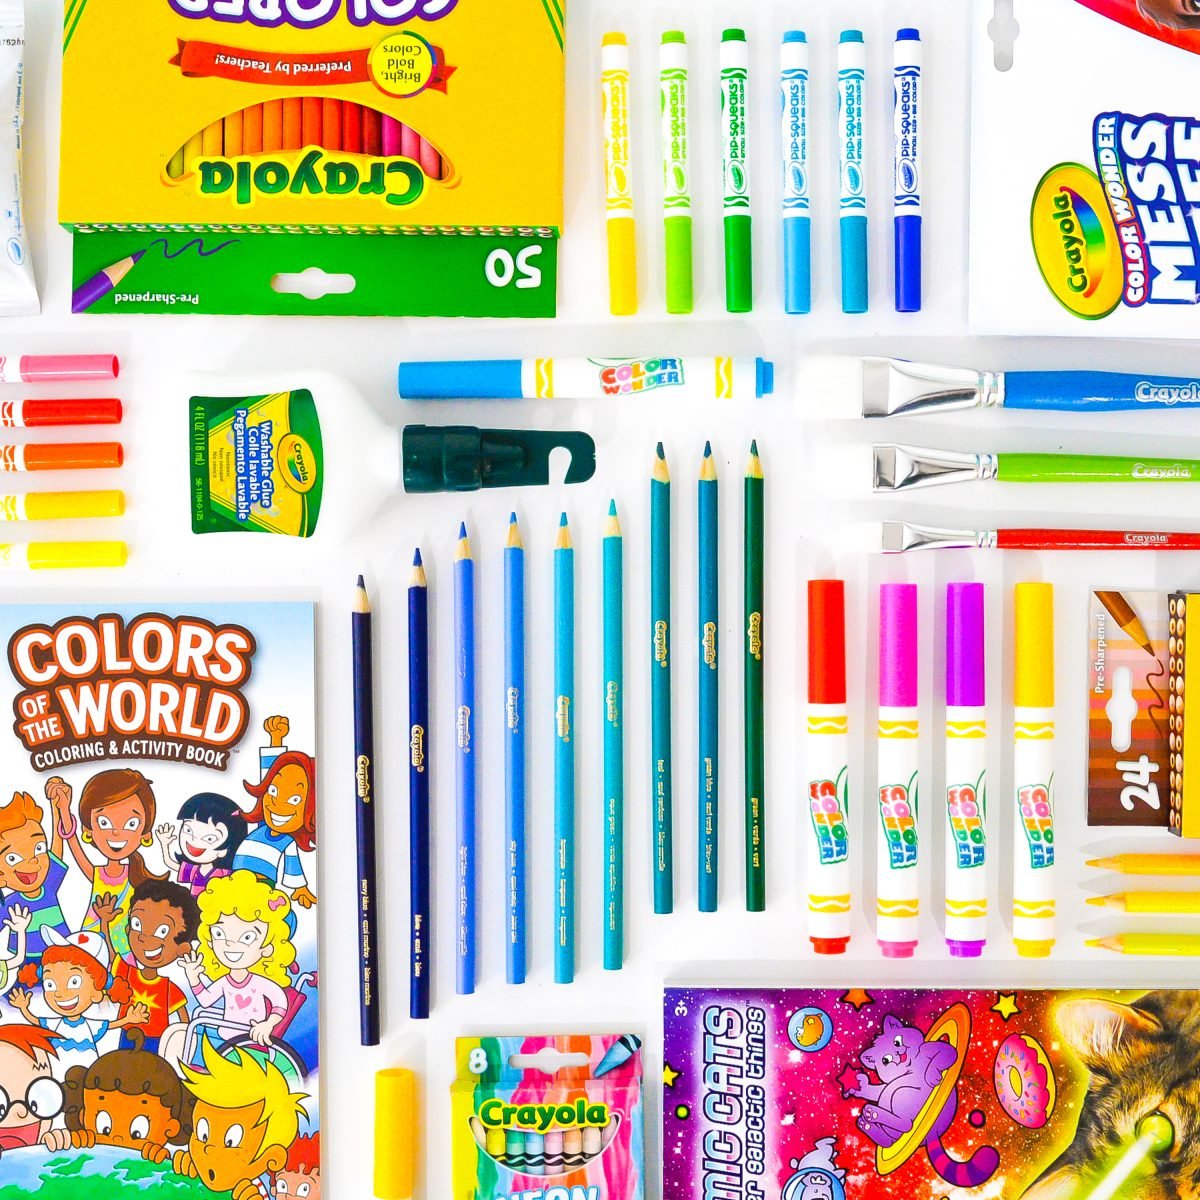 Huge array of Crayola products arranged in a grid.